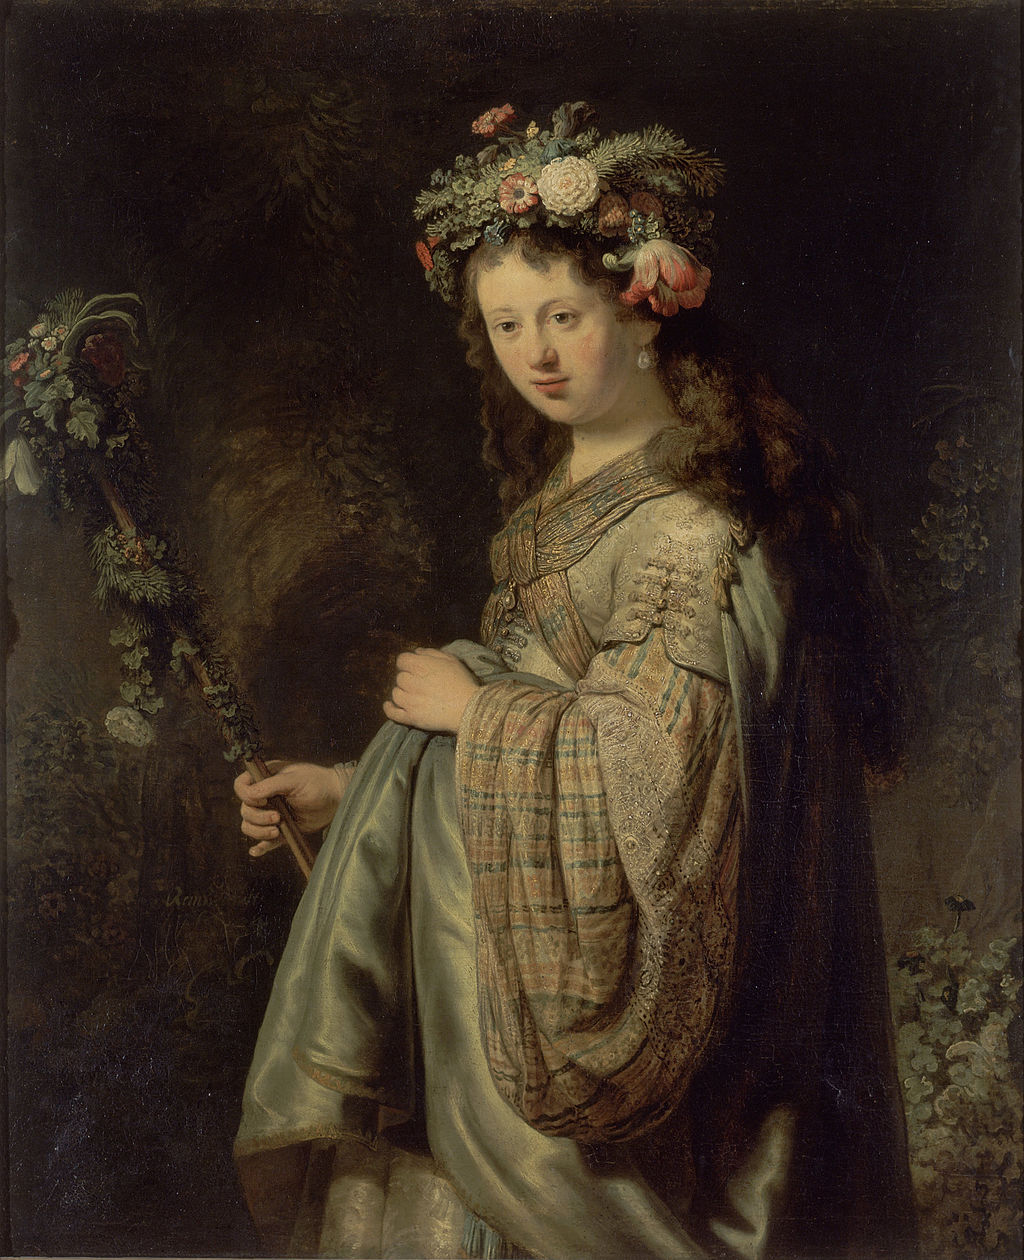 Flora Painting by Rembrandt Oil on Canvas Reproduction by Blue Surf Art